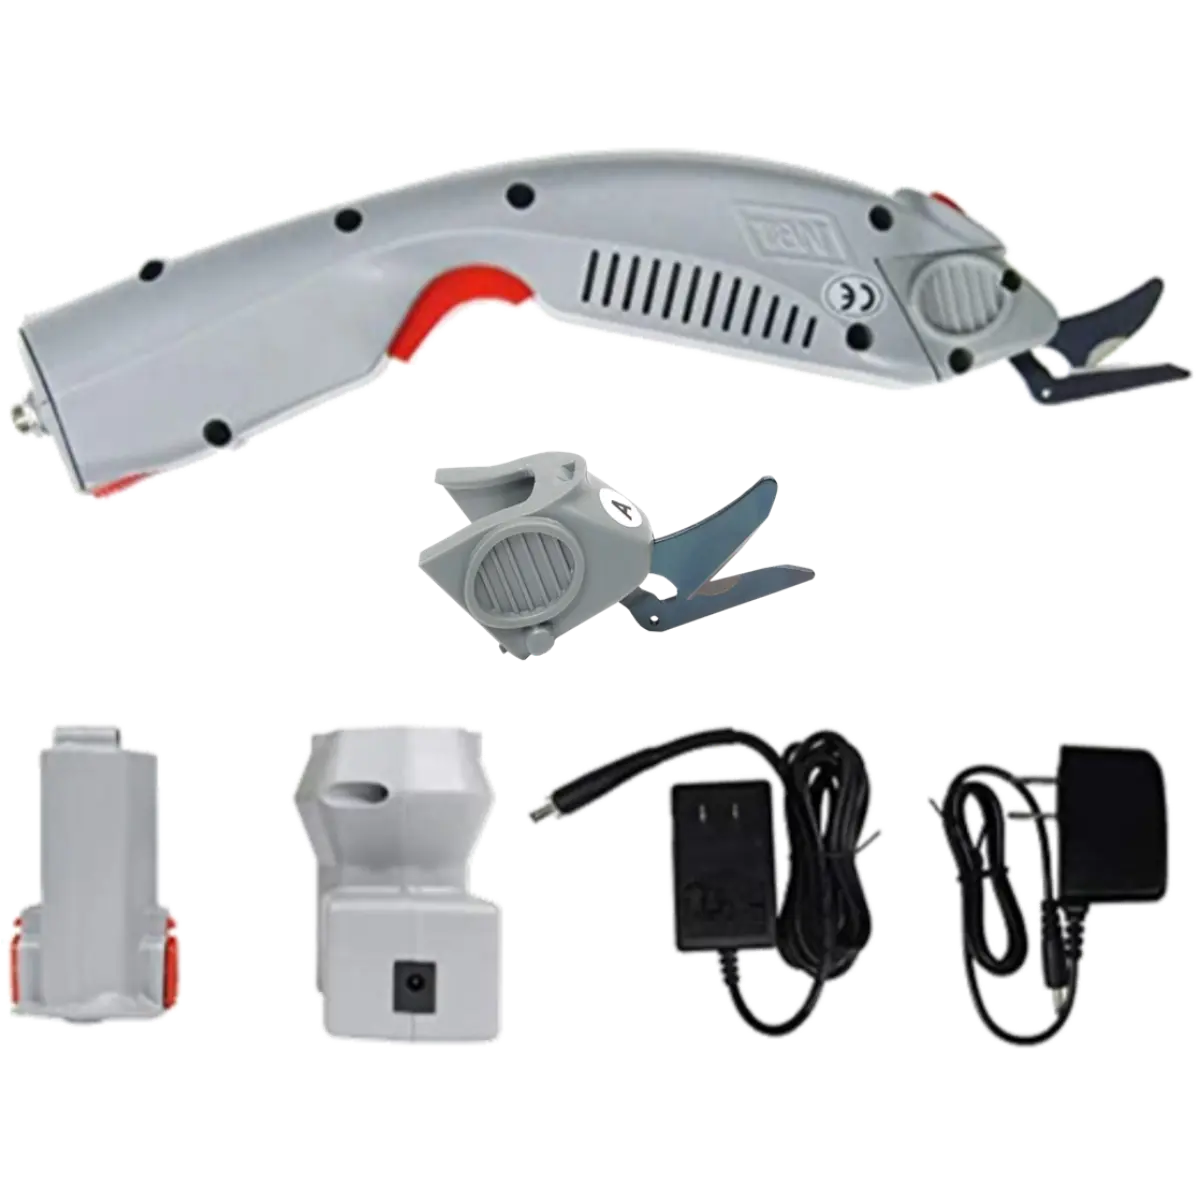 Portable Electric Scissors WBT-1 for Industrial or Domestic Use Anti Fatigue, quick, durable